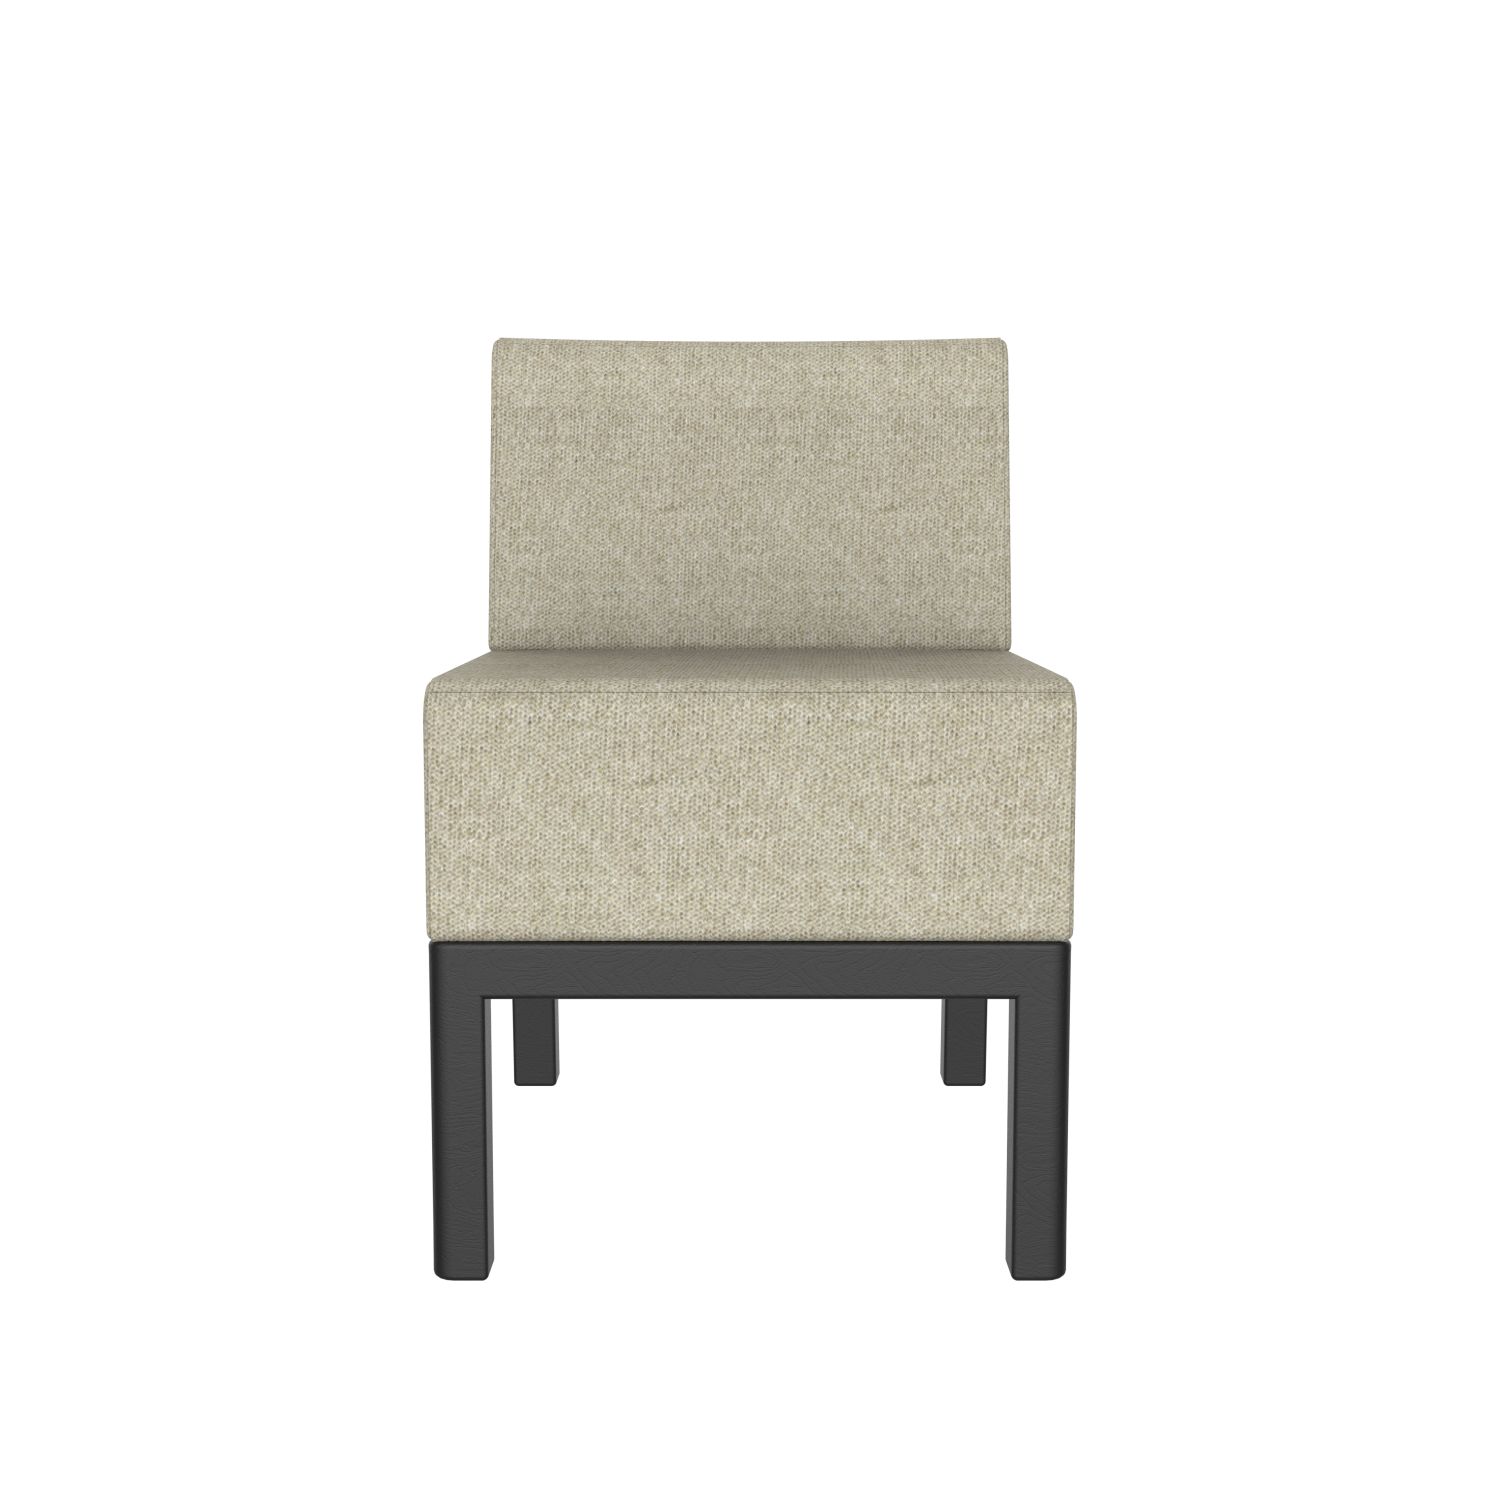 lensvelt piet boon chair 01 without armrests moss stone grey 11 price level 2 black ral9005 hard leg ends